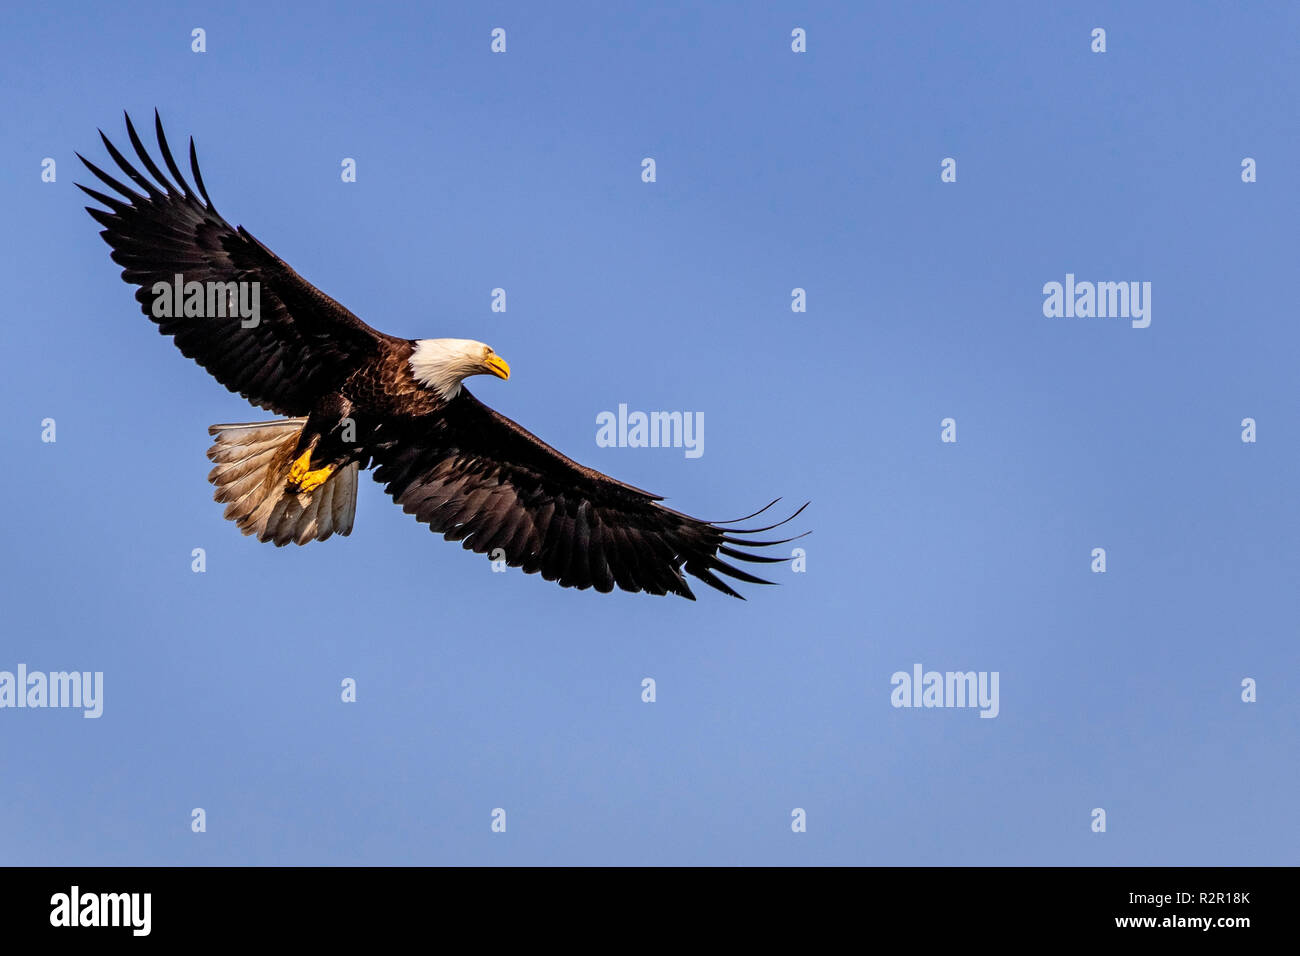 Bald eagle soaring on a beautiful spring day above the Broughton Archipelago, First Nations Territory, British Columbia, Canada Stock Photo